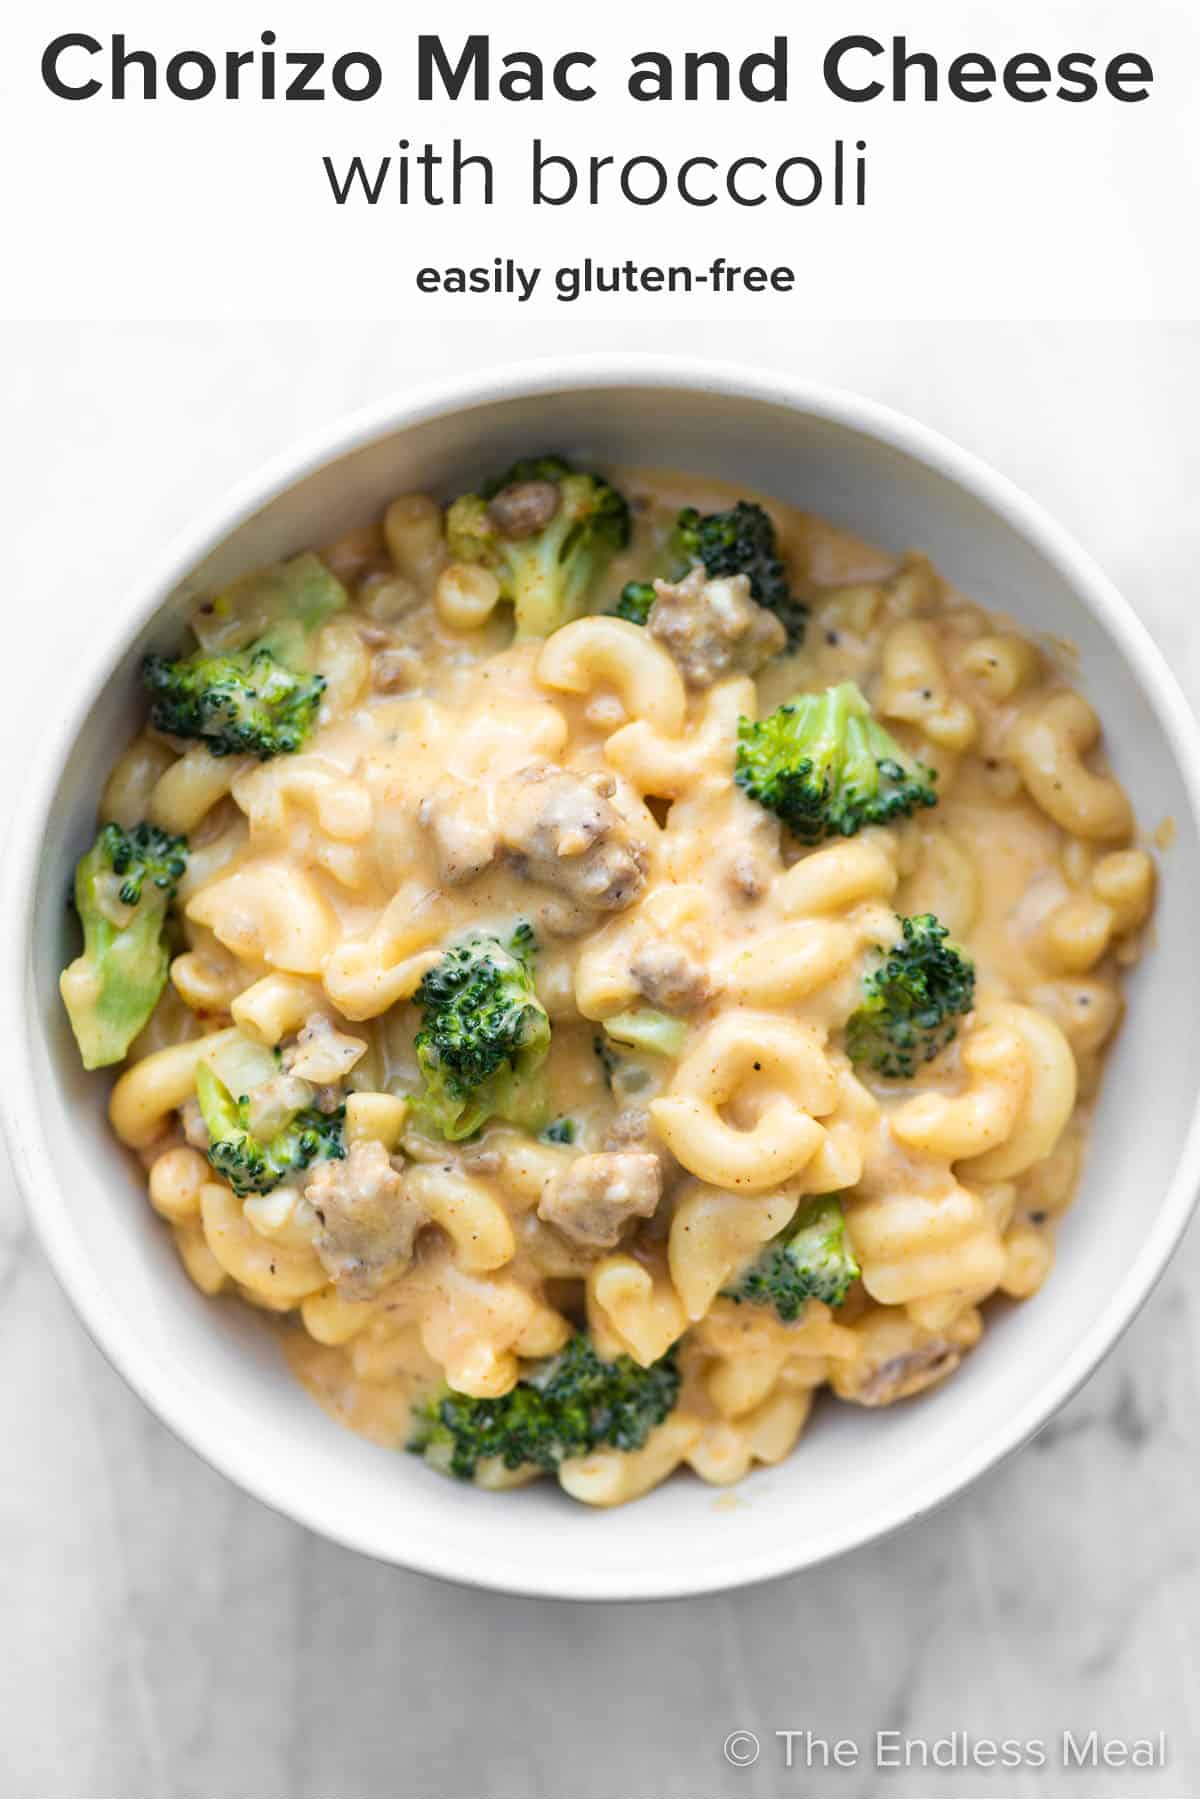 PIN TO SAVE! Broccoli and chorizo mac and cheese is an easy stovetop macaroni and cheese recipe made with delicious chorizo, lots of steamed broccoli, and a creamy cheese sauce. You'll love this easy, family-friendly meal! #theendlessmeal #macandcheese #macaroniandcheese #pasta #pastadinner #pastarecipe #chorizo #chorizomacandcheese #chorizopasta #broccoli #sugarfree #familyrecipe #comfortfood